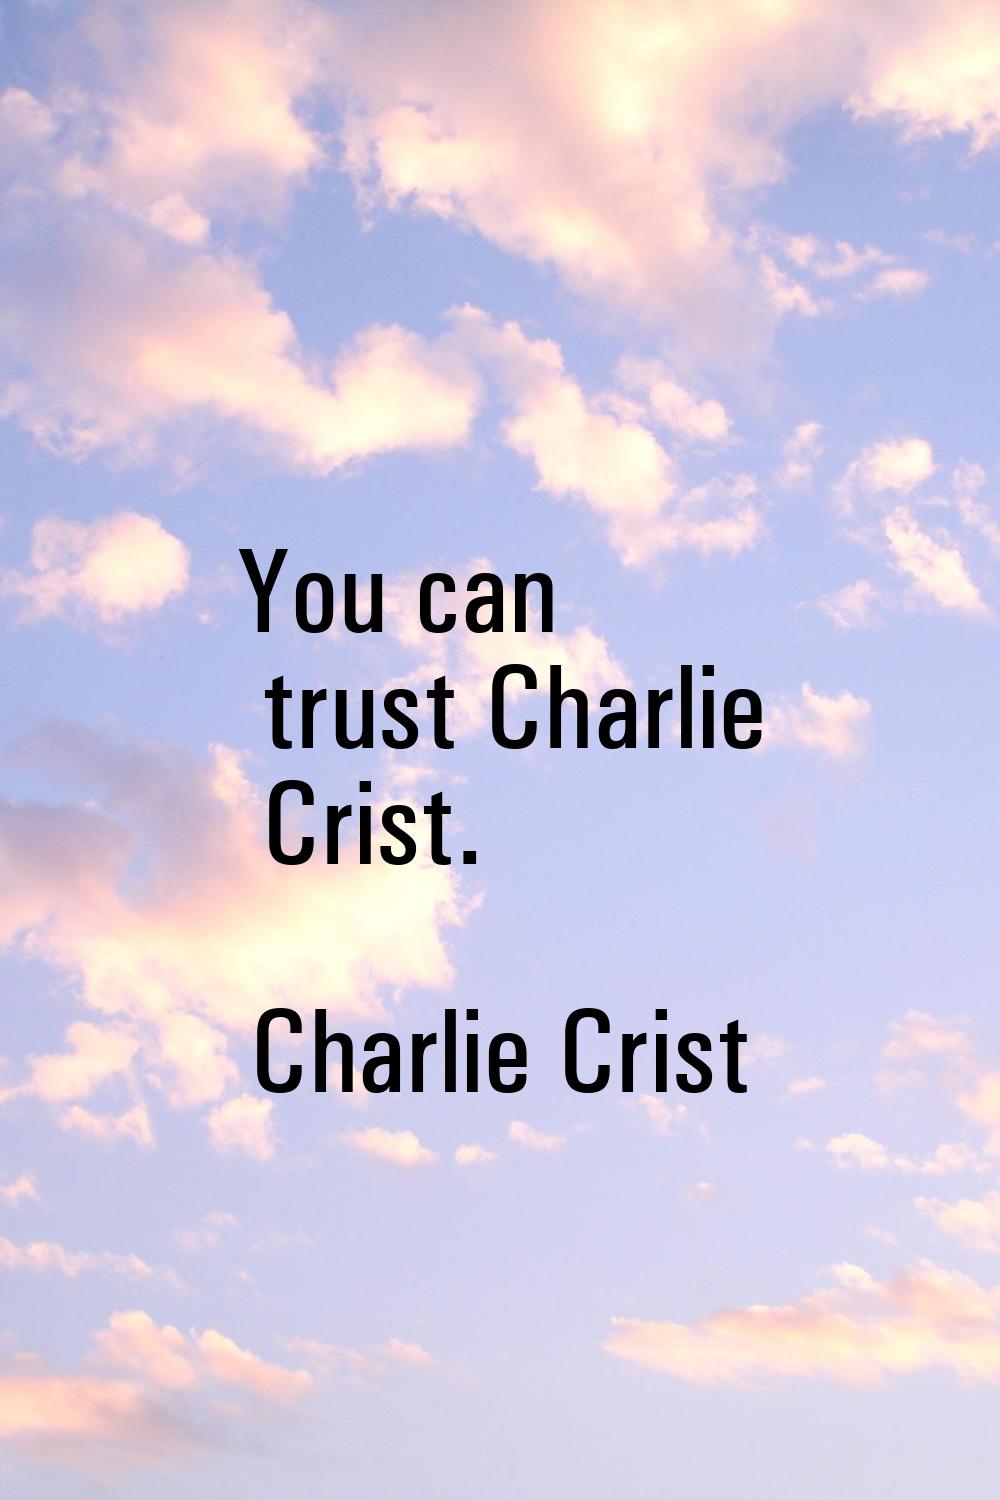 You can trust Charlie Crist.